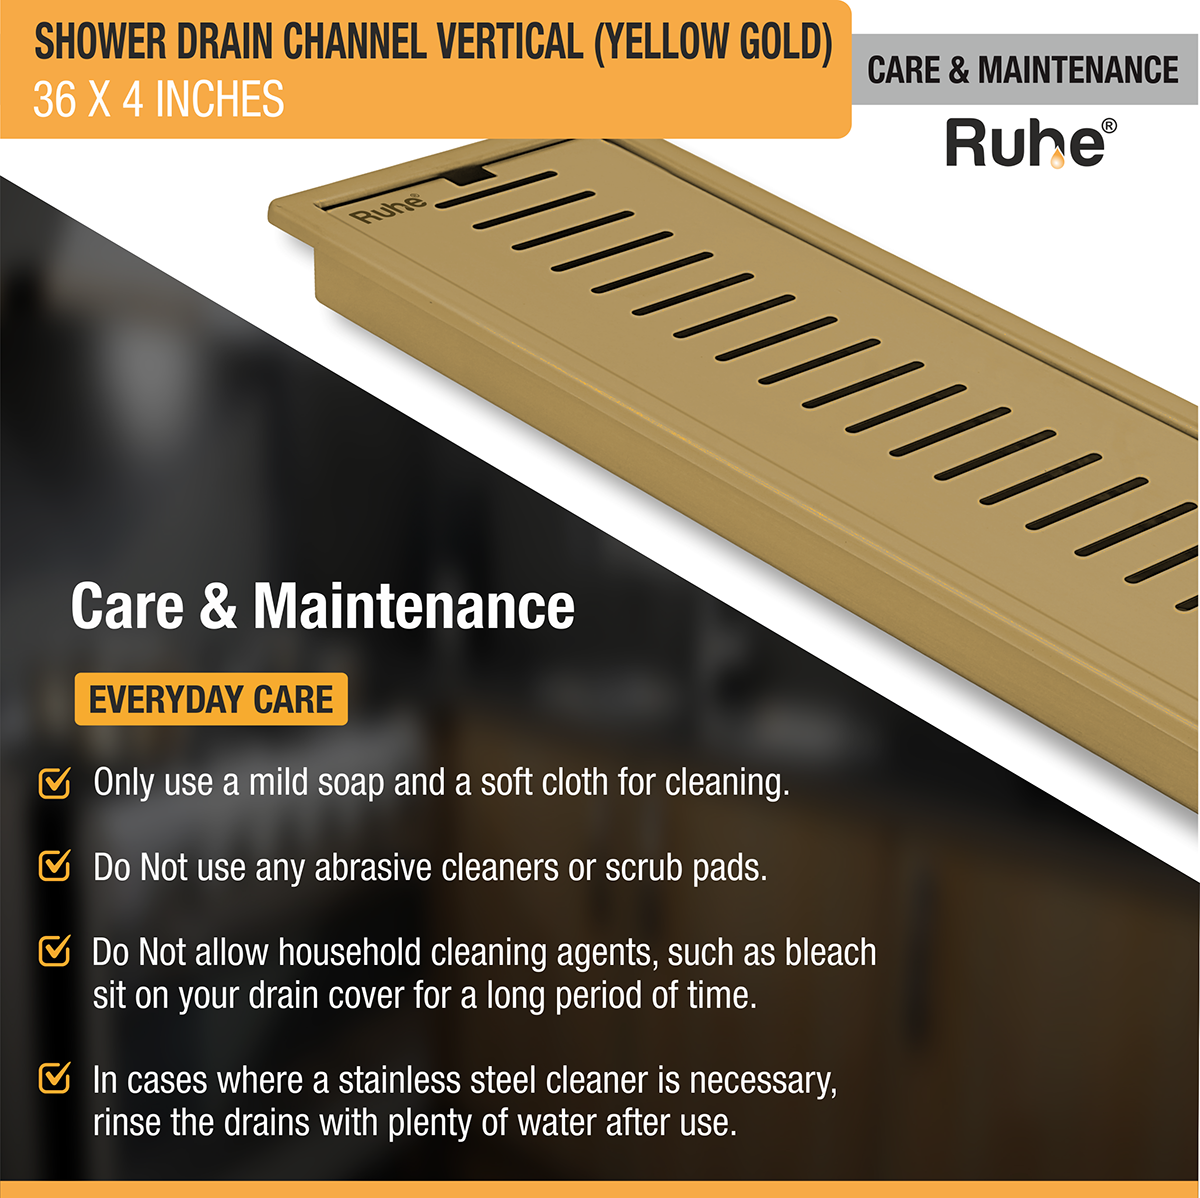 Vertical Shower Drain Channel (36 x 4 Inches) YELLOW GOLD care and maintenance